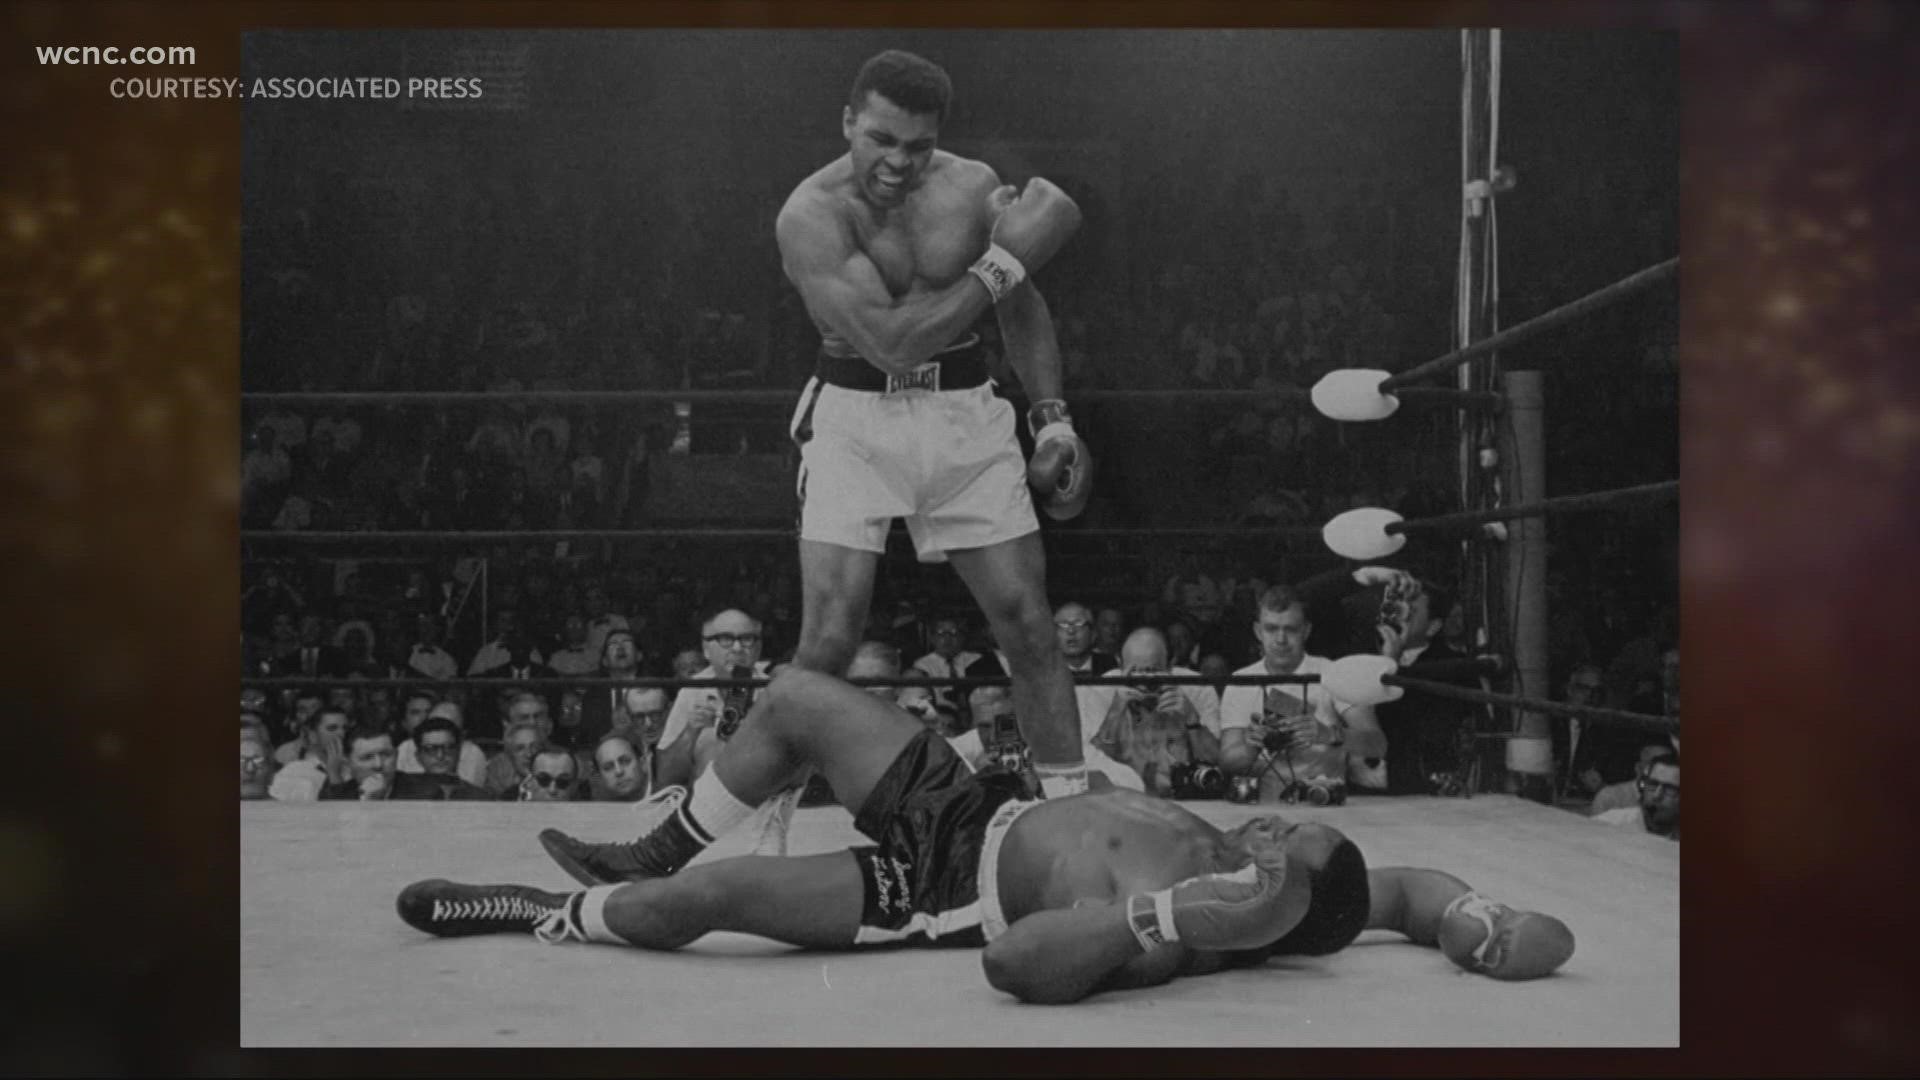 After the Olympics, Cassius Clay turned professional, beat Sonny Liston to become heavyweight champion, converted to Islam and changed his name to Muhammad Ali.